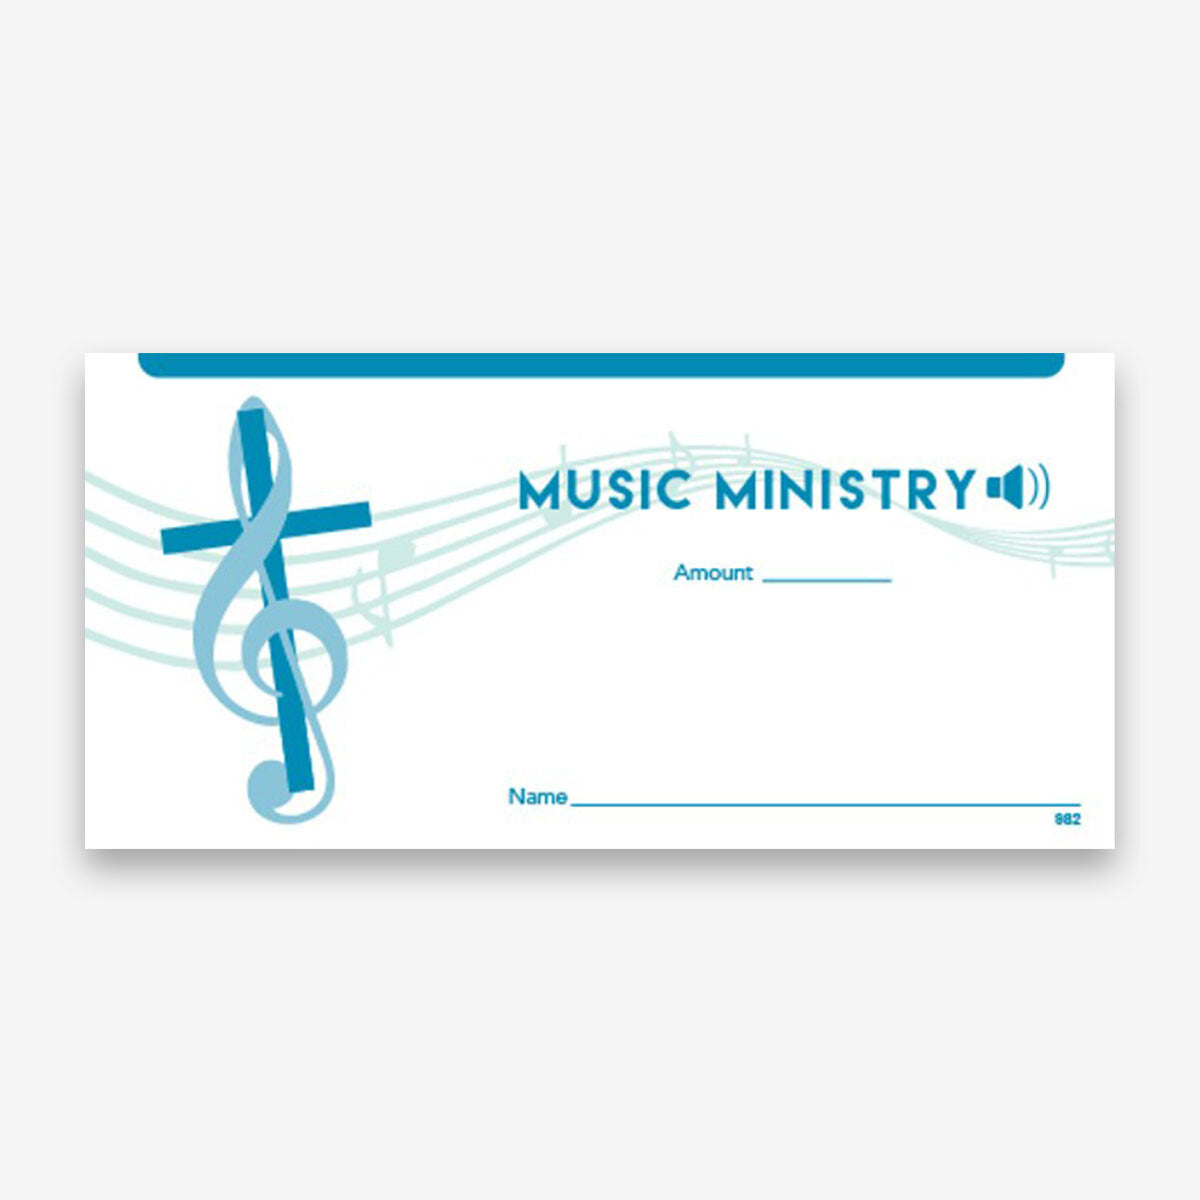 NCS National Church Solutions Music Ministry Offering Envelope